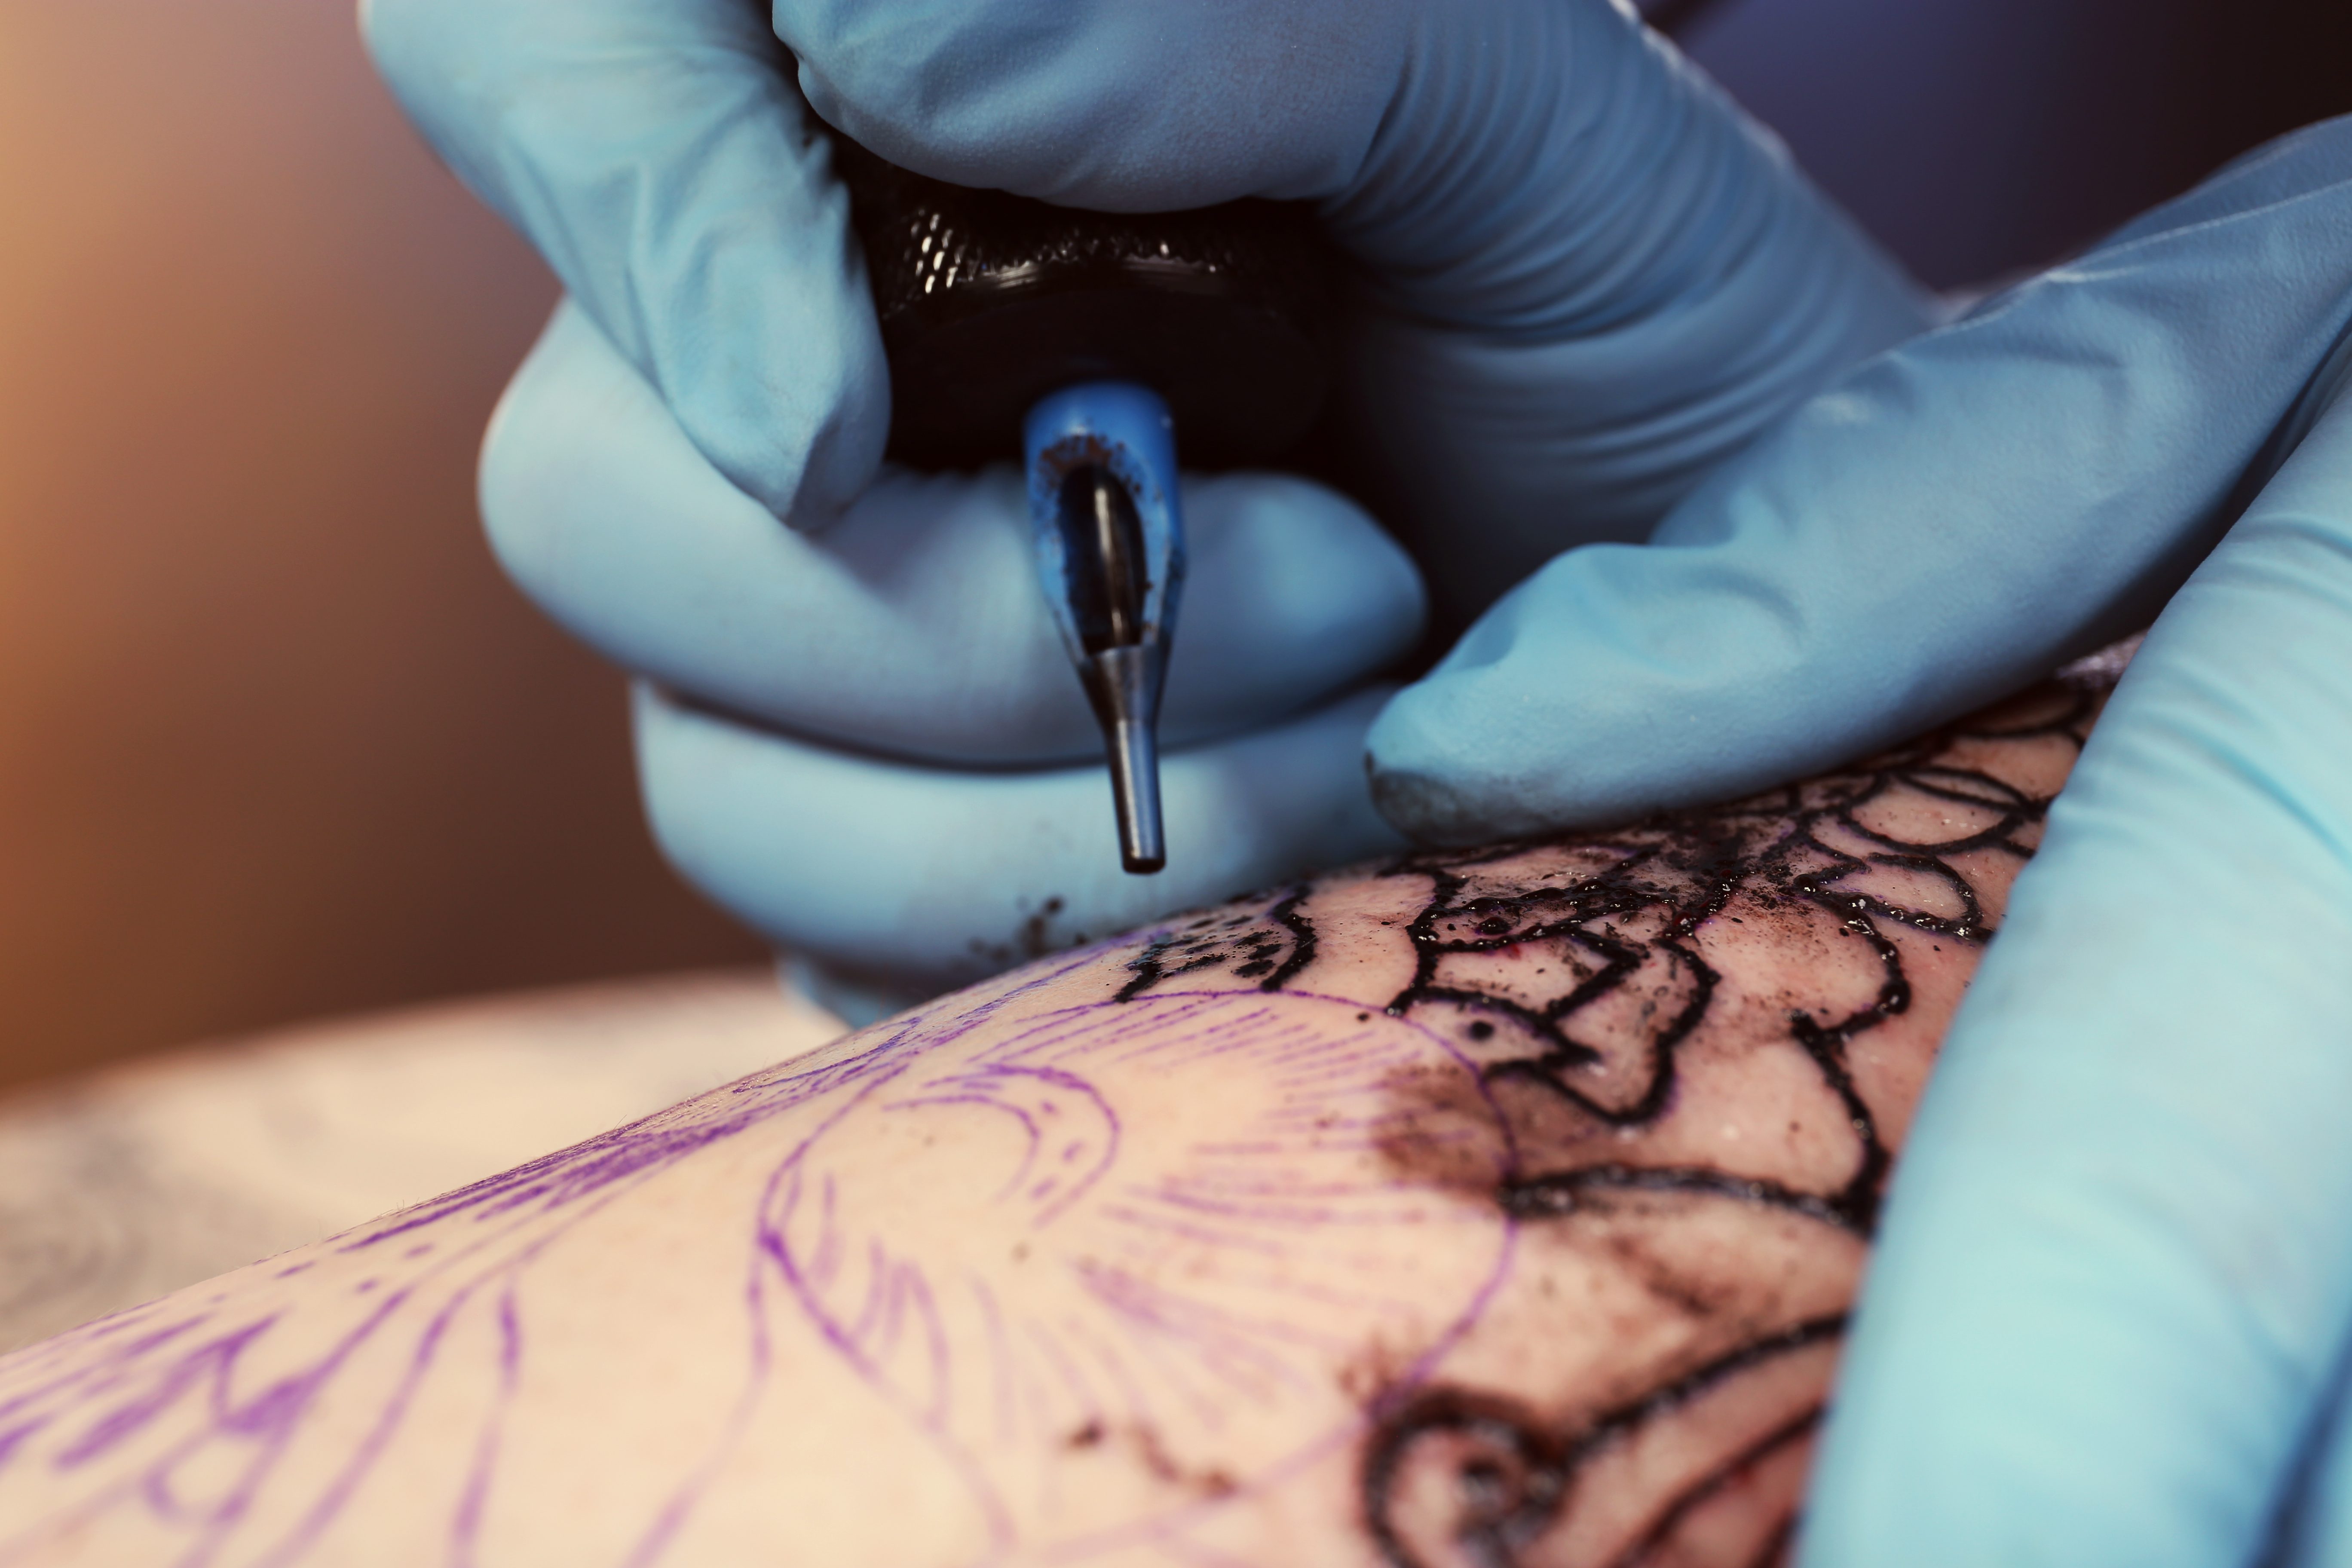 Tattoo ink can seep deep into the body: Study - Health - The